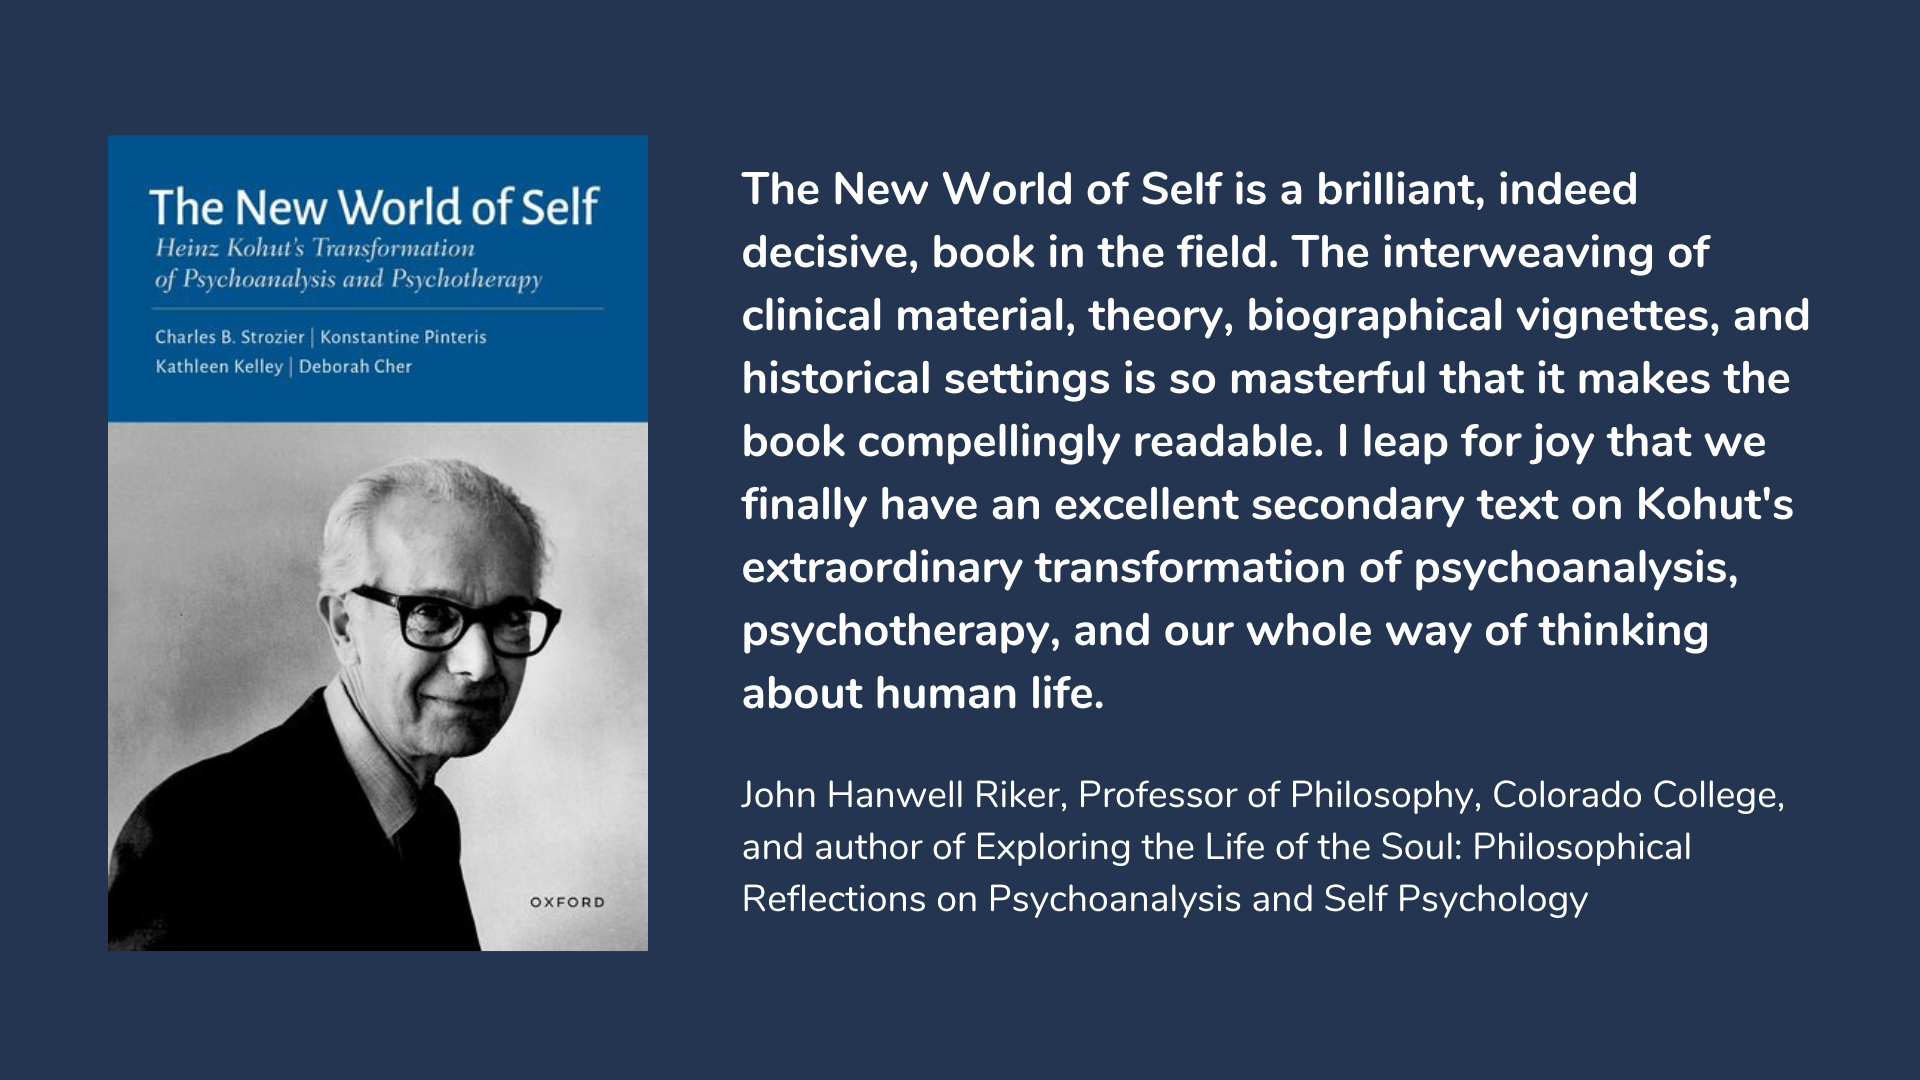 The New World of Self: Heinz Kohut's Transformation of Psychoanalysis and Psychotherapy, book cover and description.